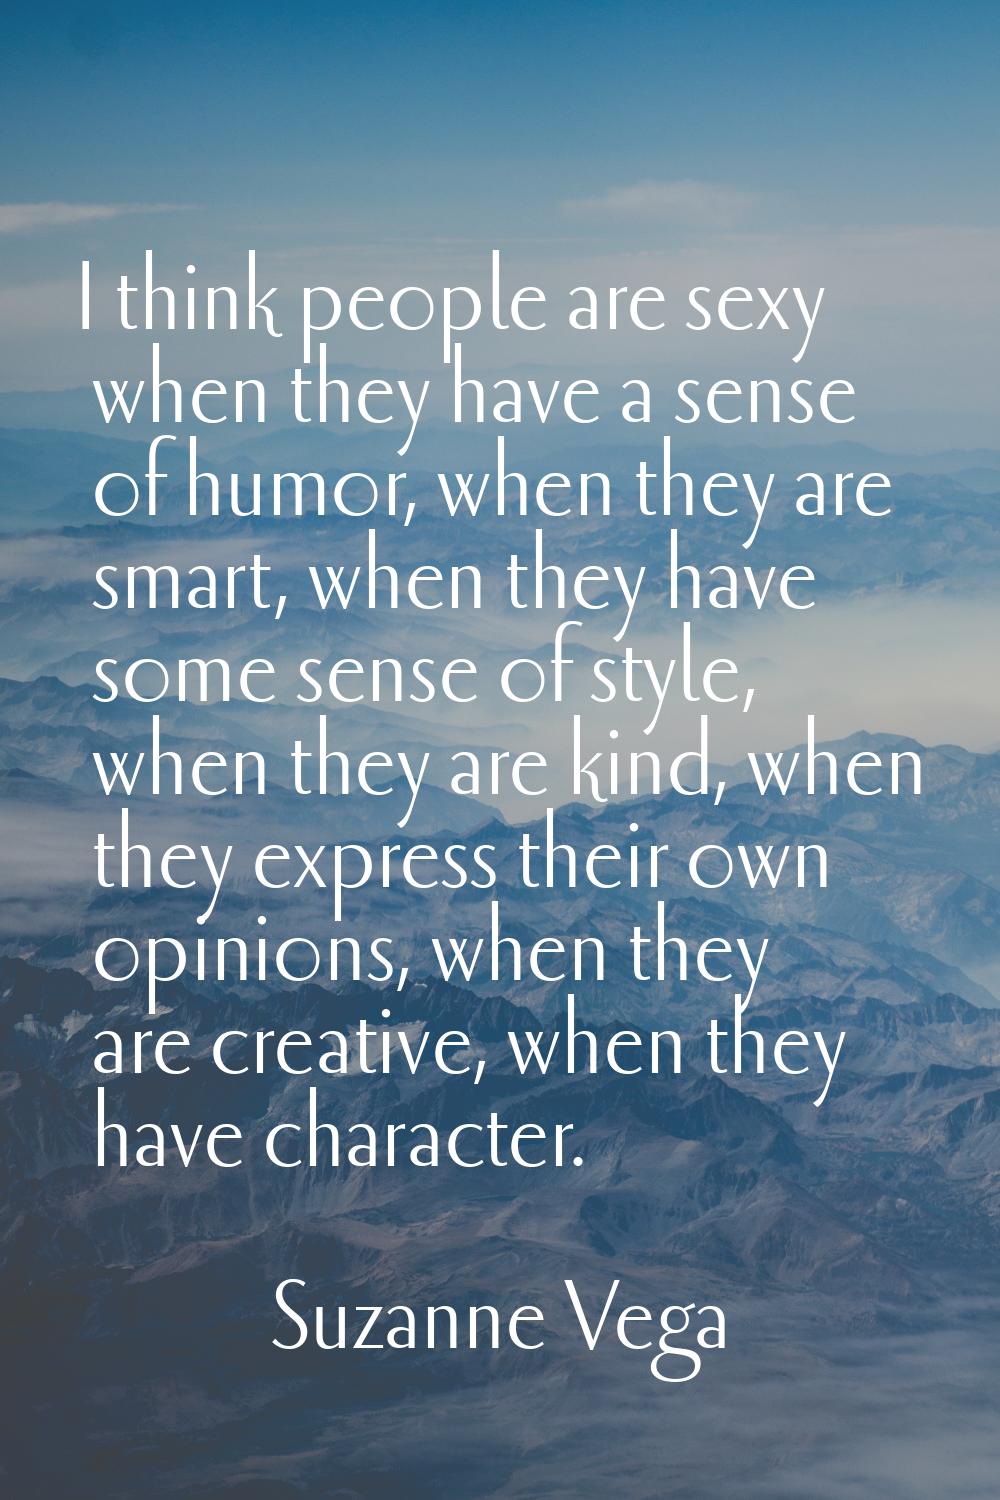 I think people are sexy when they have a sense of humor, when they are smart, when they have some s